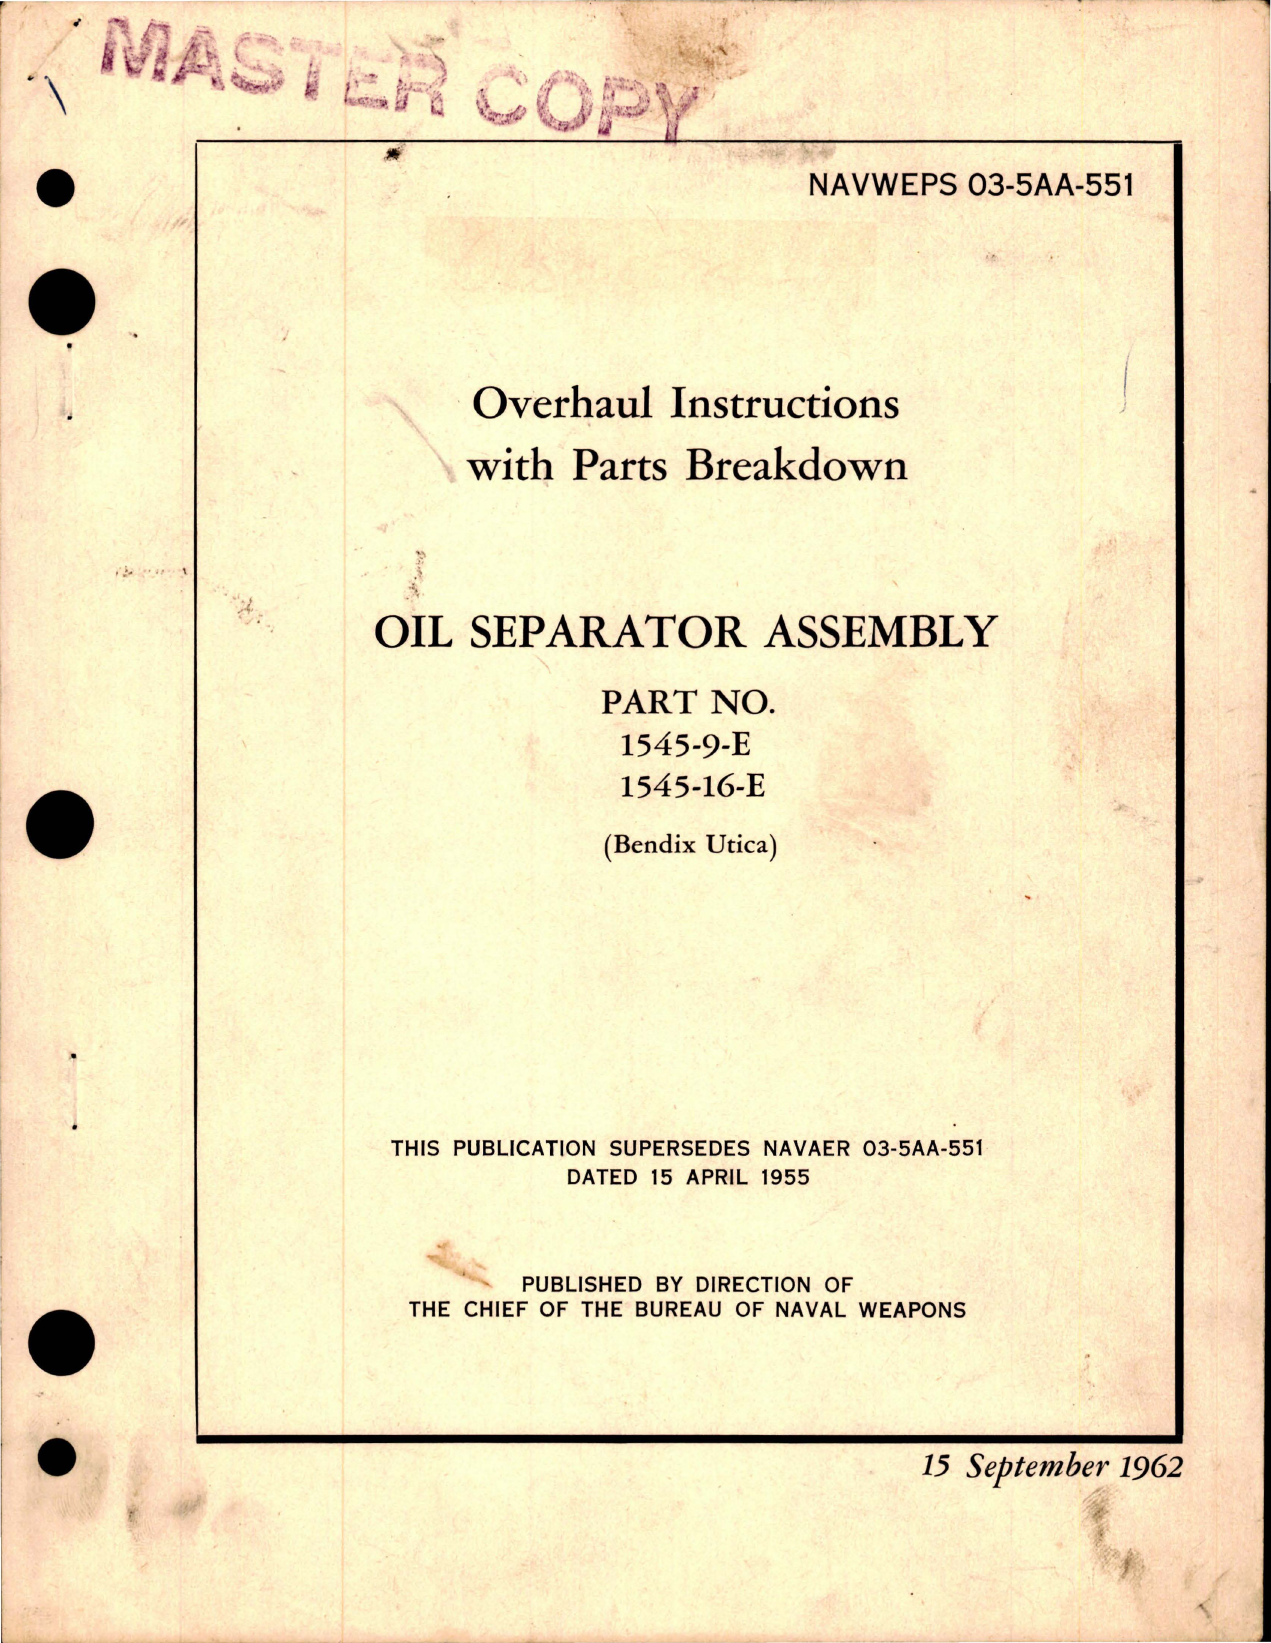 Sample page 1 from AirCorps Library document: Overhaul Instructions with Parts for Oil Separator Assembly - Part 1545-9-E and 1545-16-E 